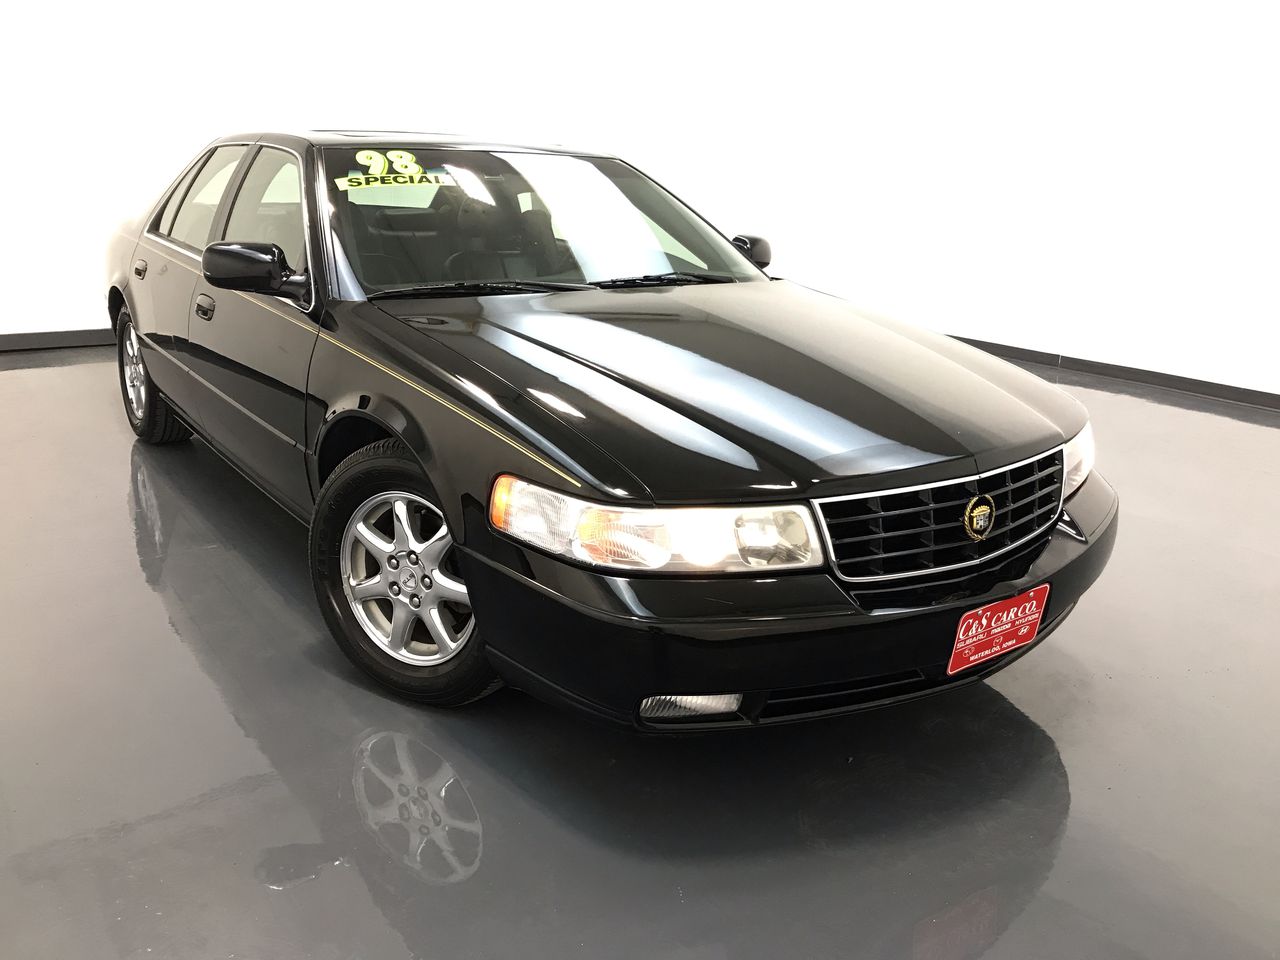 1998 Cadillac Seville STS - Stock # 15499C - Waterloo, IA